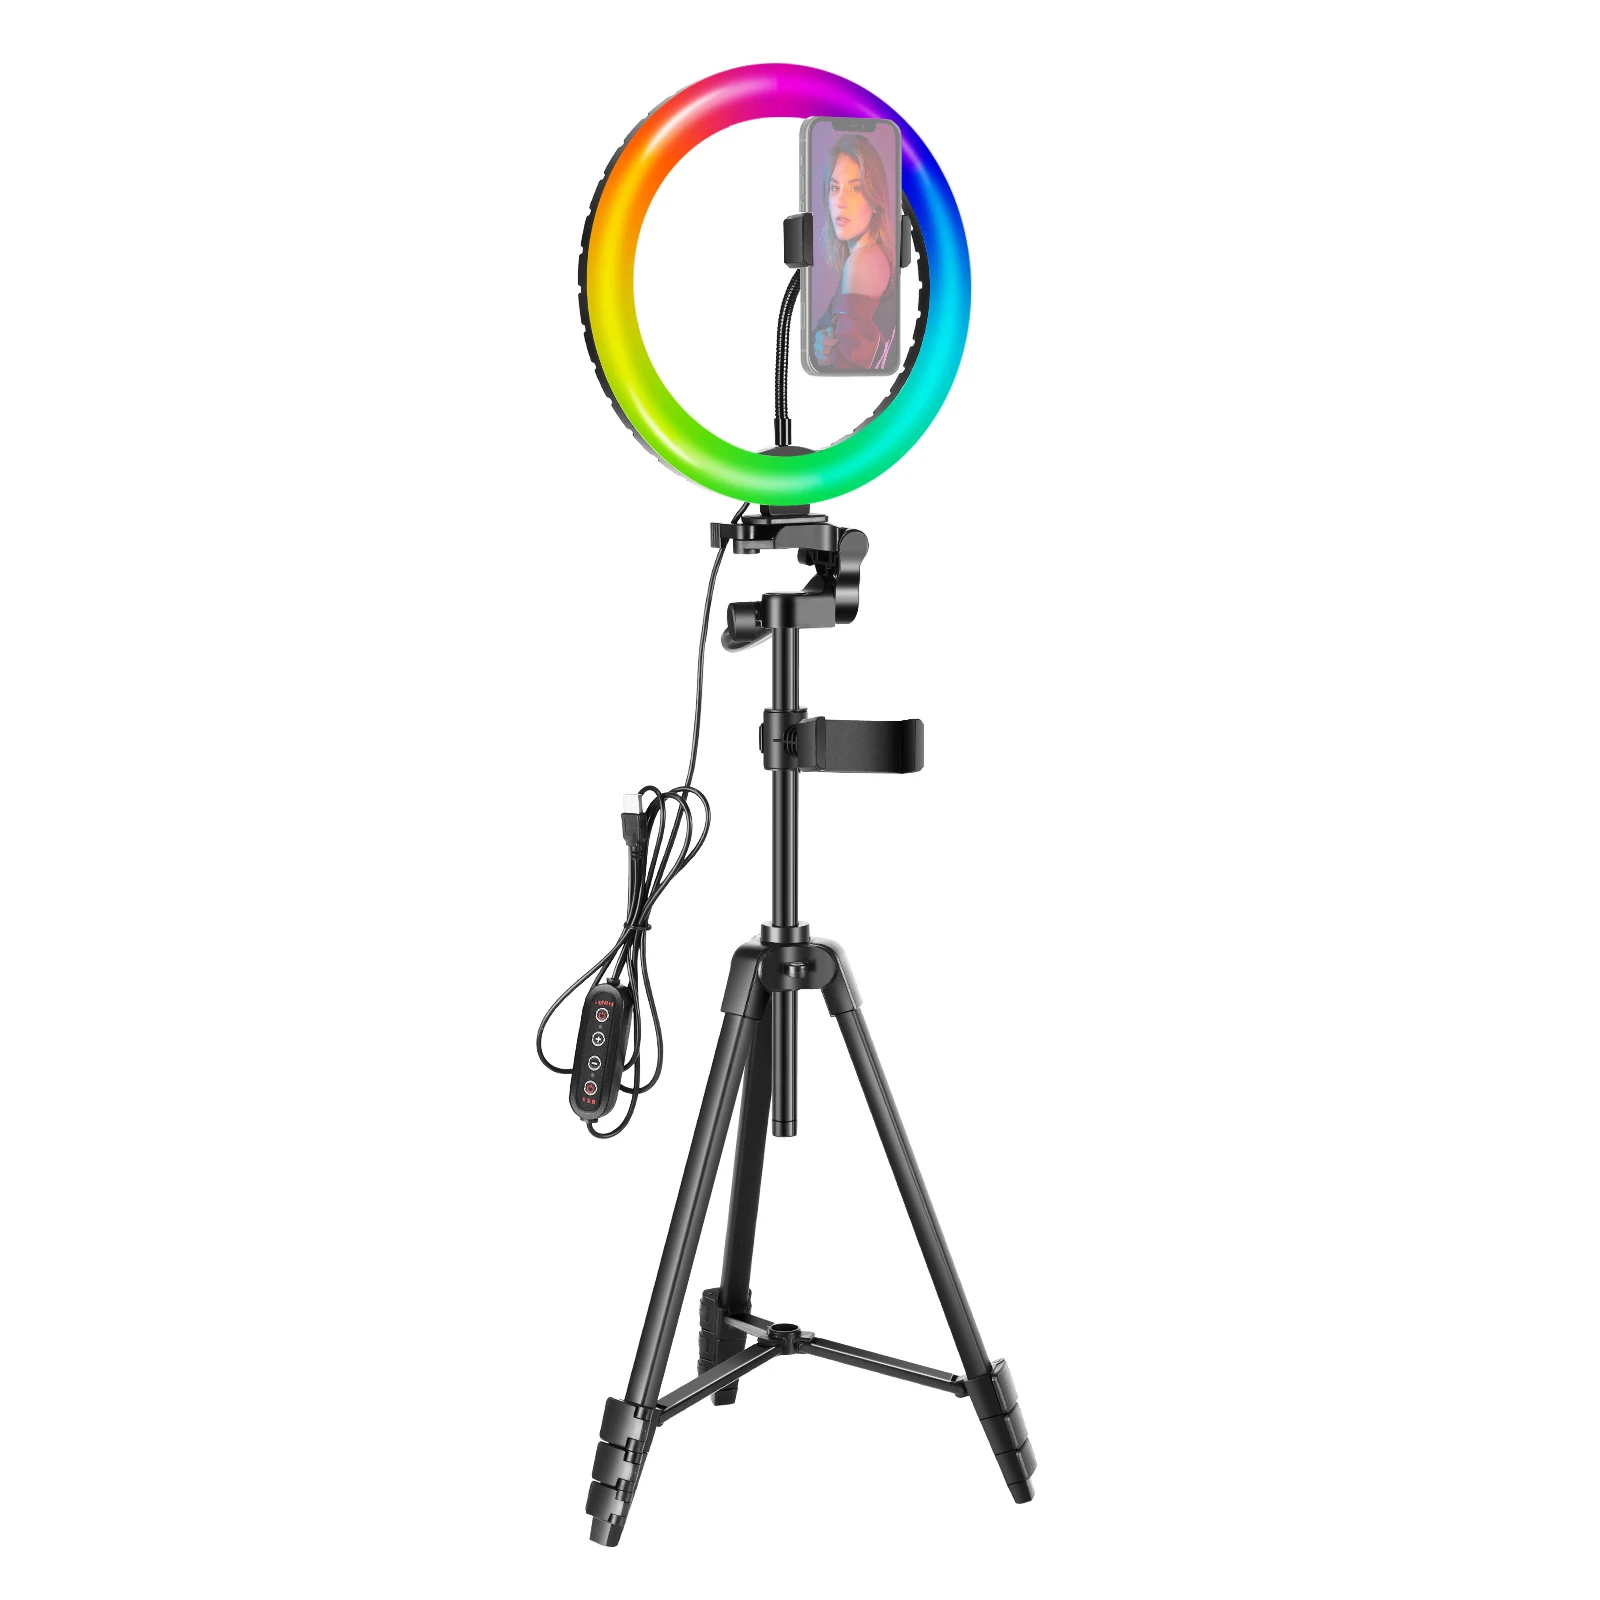 

Neewer 10/12-Inch RGB Ring Light Selfie Light Ring With Tripod Stand, Remote Control/Dimmable For Makeup/ Live Streaming/YouTube